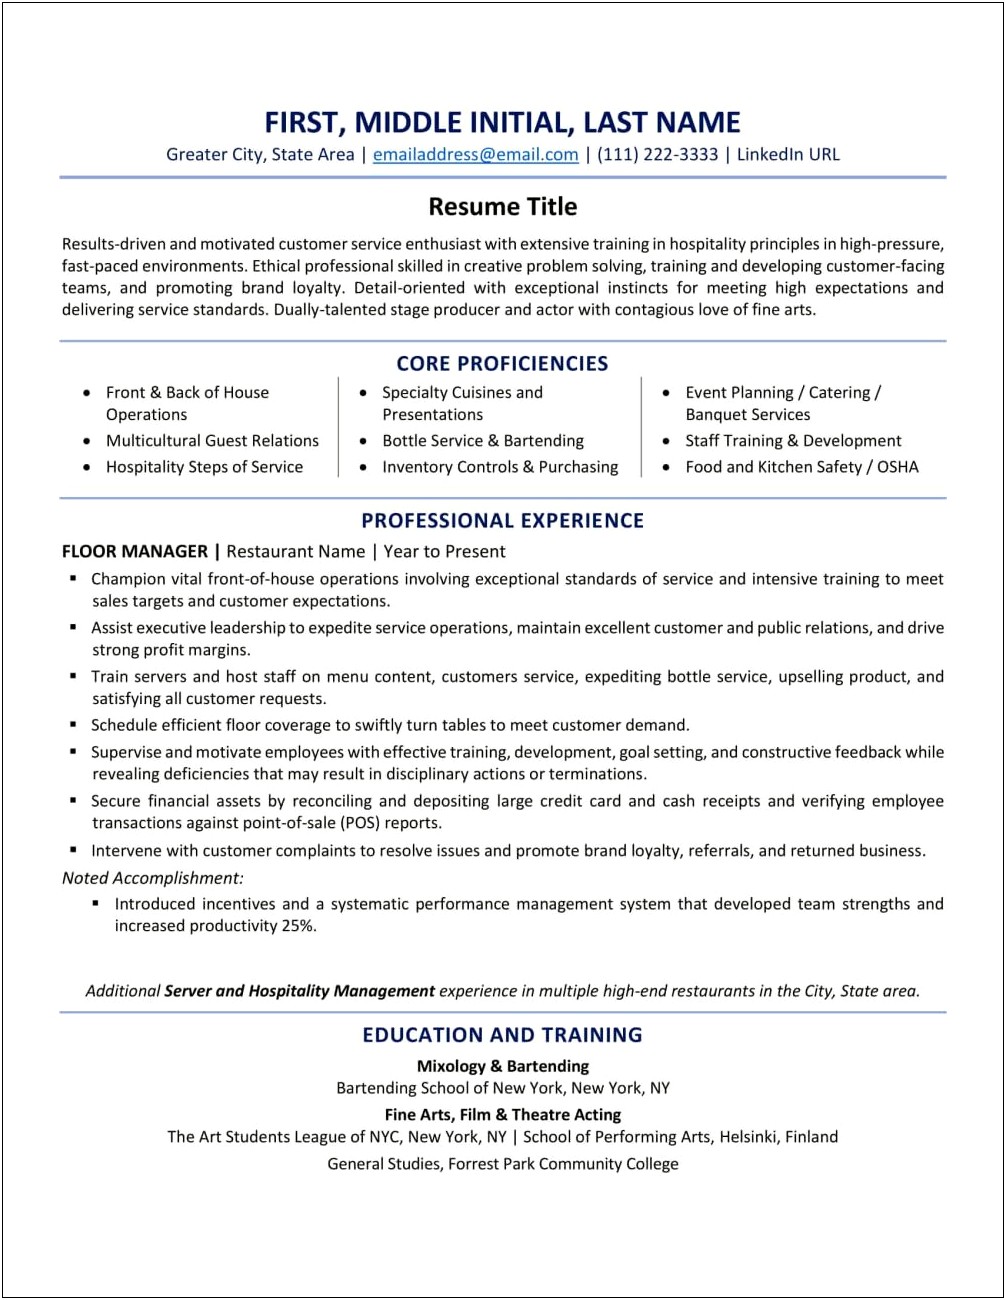 Omitting Irrelevant Job Experience From Resume